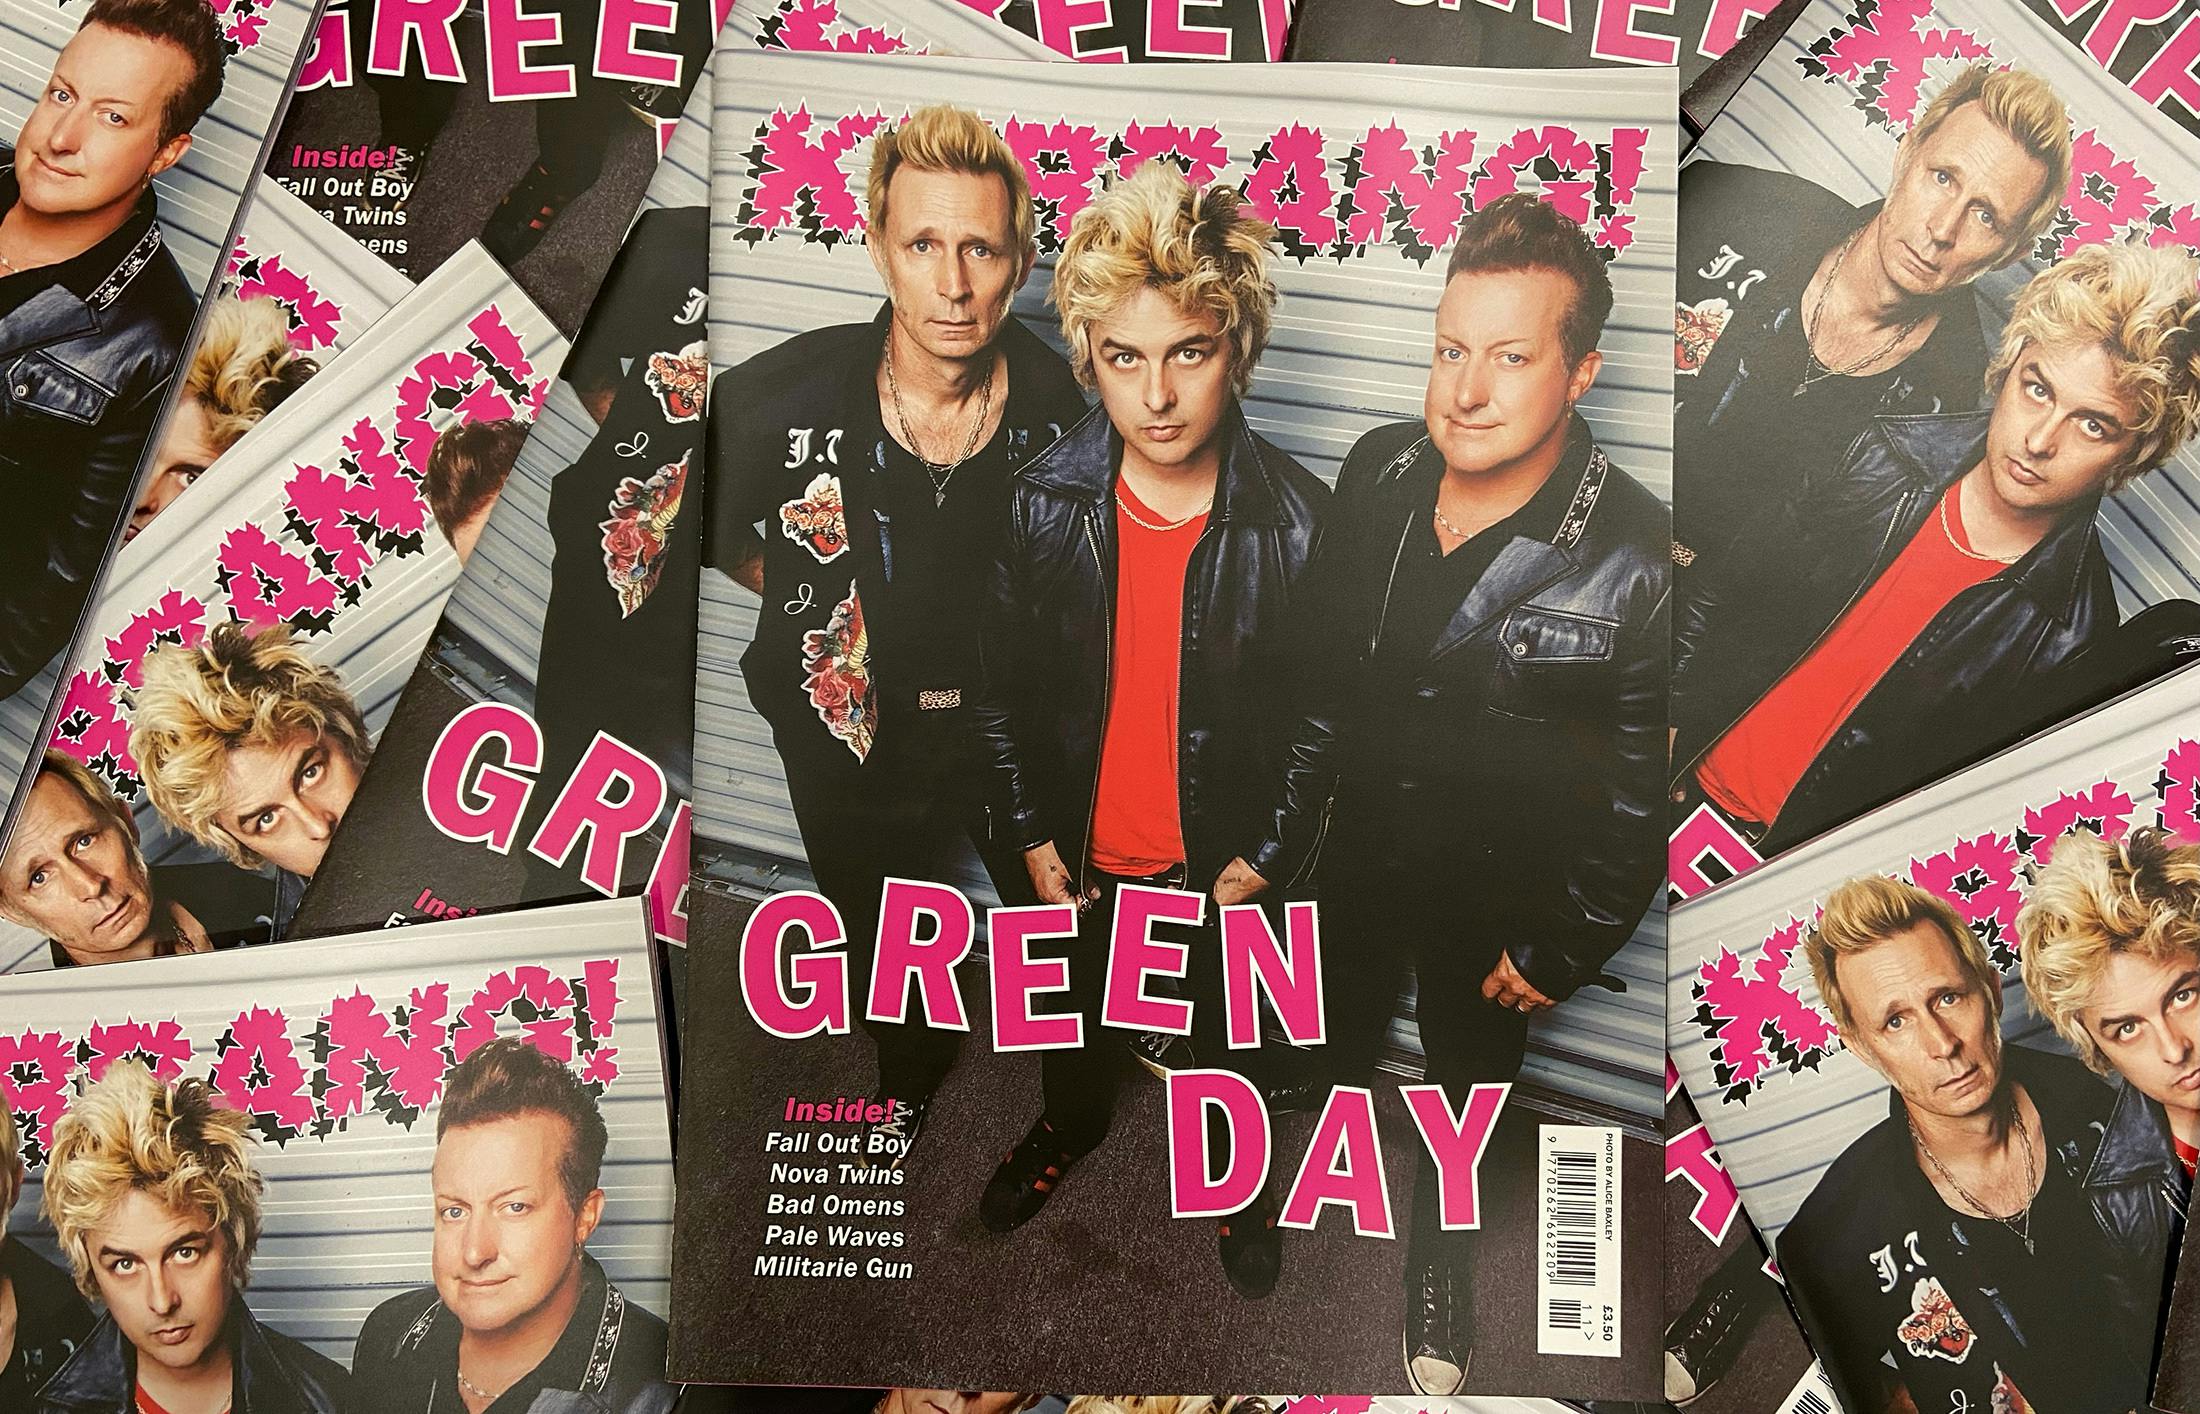 Saving the world again: Green Day take us inside new album Saviors – only in the new issue of Kerrang!